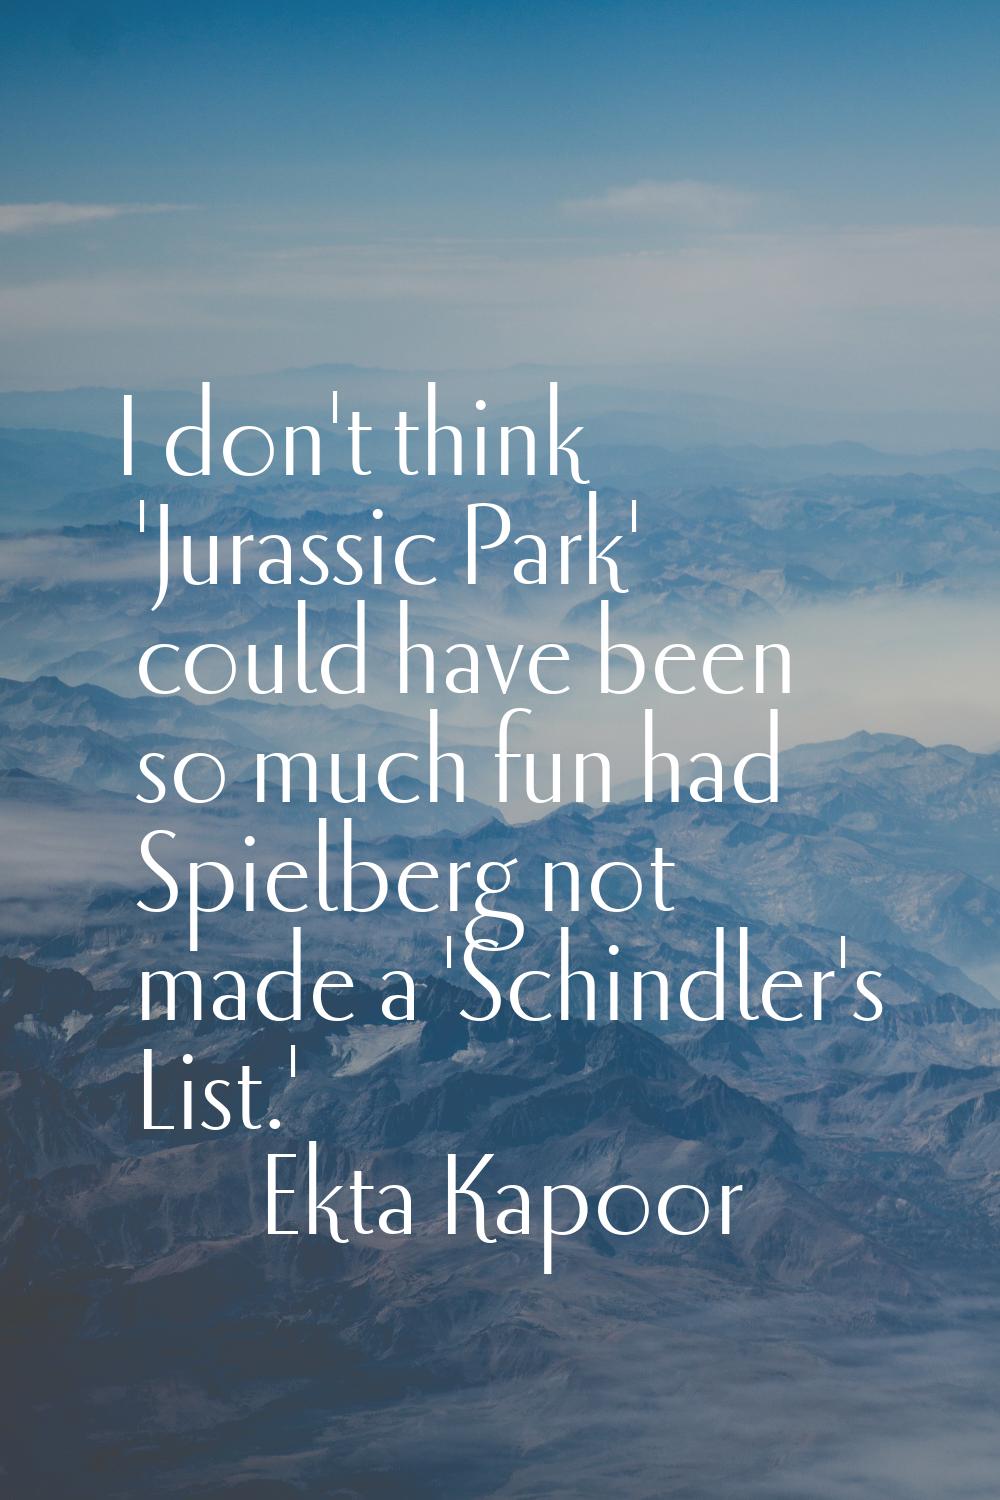 I don't think 'Jurassic Park' could have been so much fun had Spielberg not made a 'Schindler's Lis